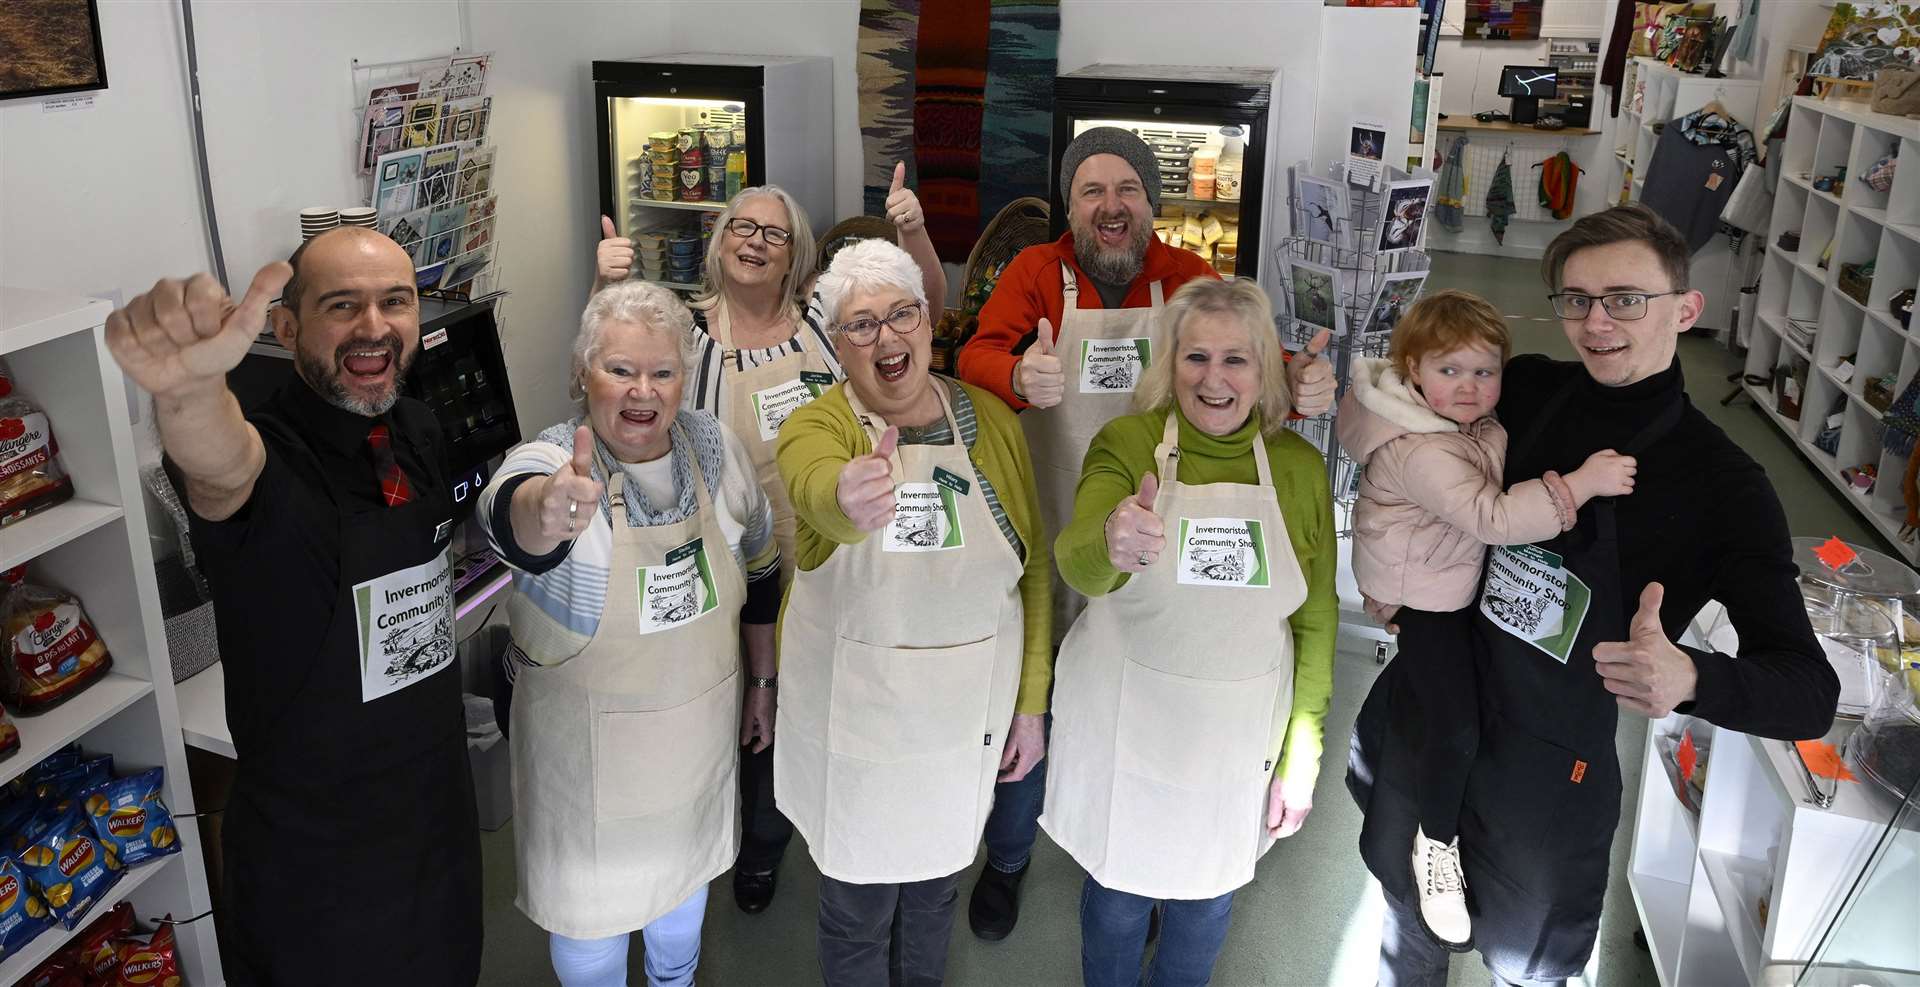 Celebrations from the team who will be running the Invermoriston Community Shop (left - right) Stephane Pilli , Stella Barter, Jackie Buckley, Hilary Wilson, Paul McIntosh, Lynne West and Julius Prakelis with his daughter, Renesme.